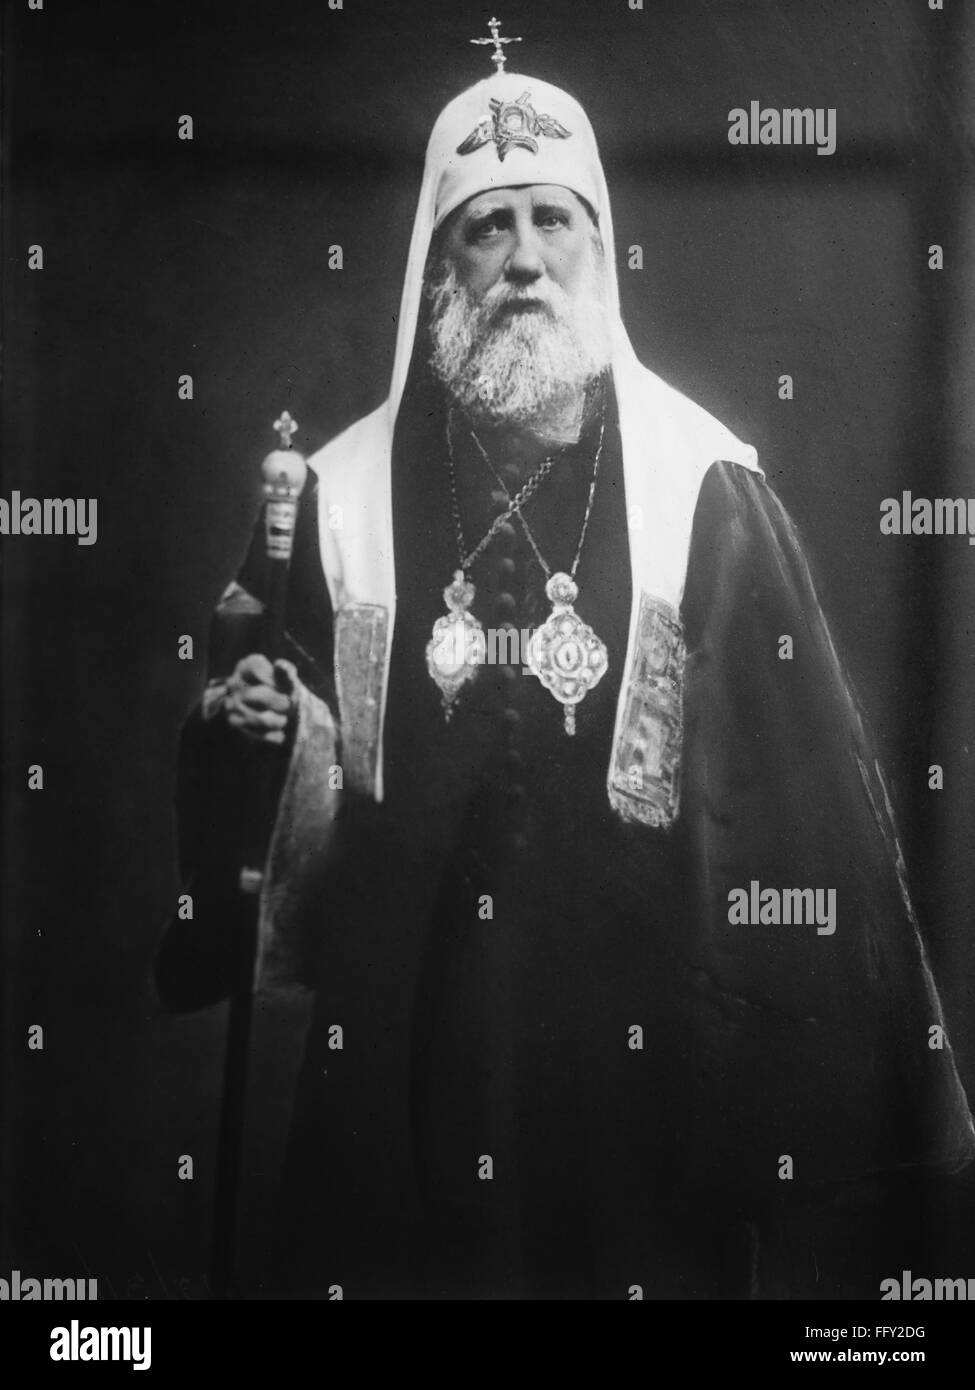 SAINT TIKHON OF MOSCOW (1865-1925). /n11th Patriarch of Moscow and All Russia of the Russian Orthodox Church from 1917 to 1925. Born Vasily Ivanovich Bellavin. Photograph, c1920. Stock Photo